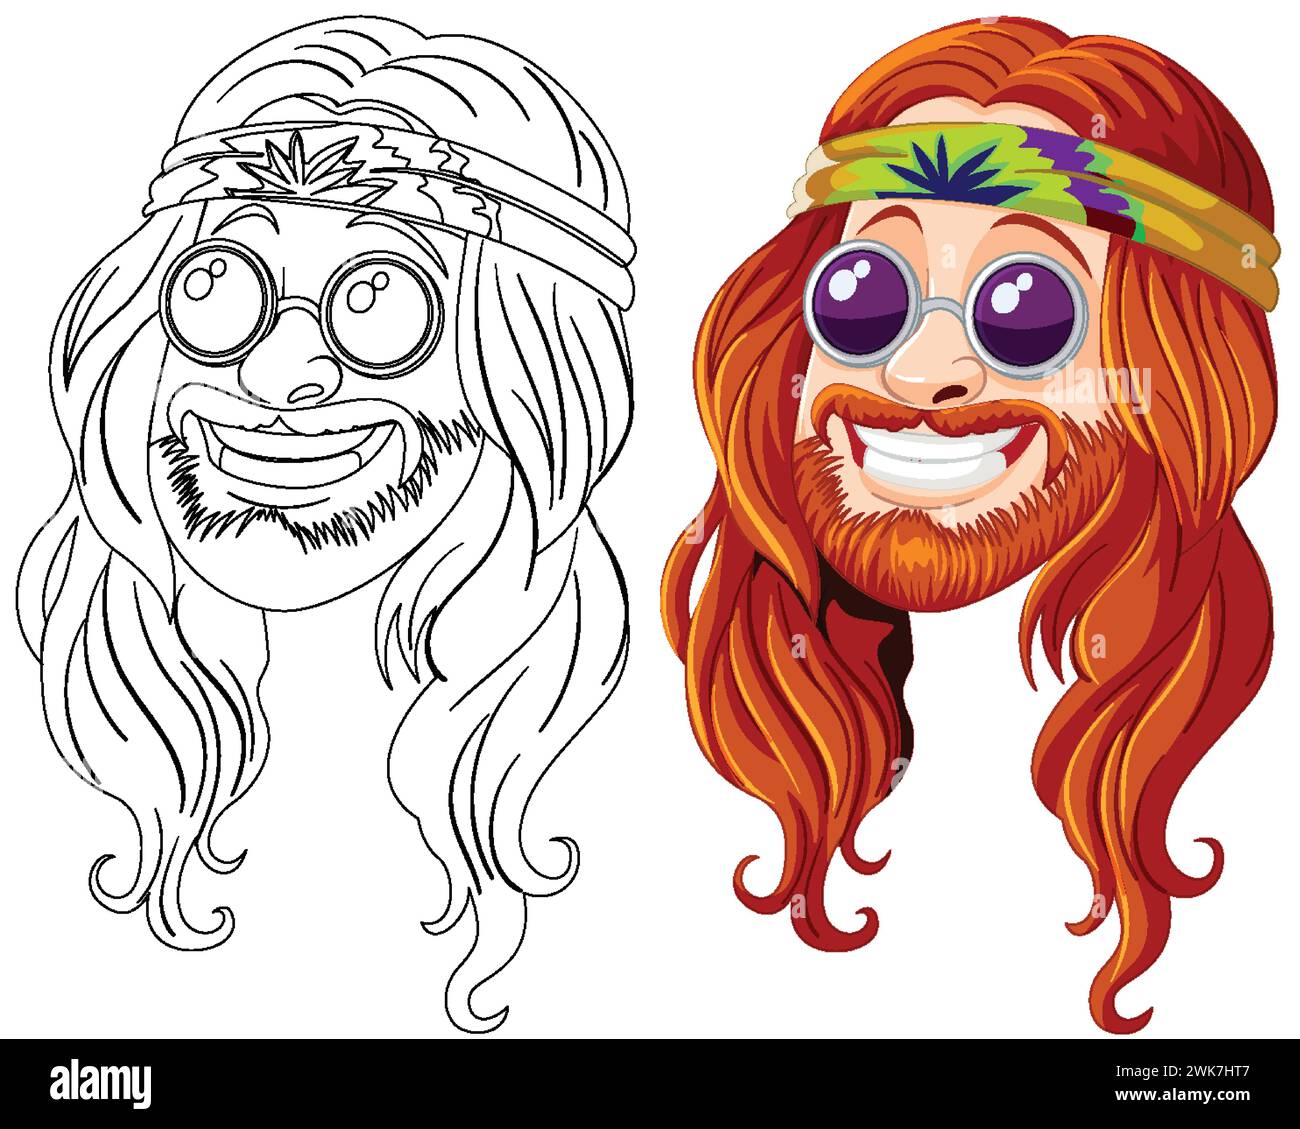 Black and white and colored hippie character faces Stock Vector